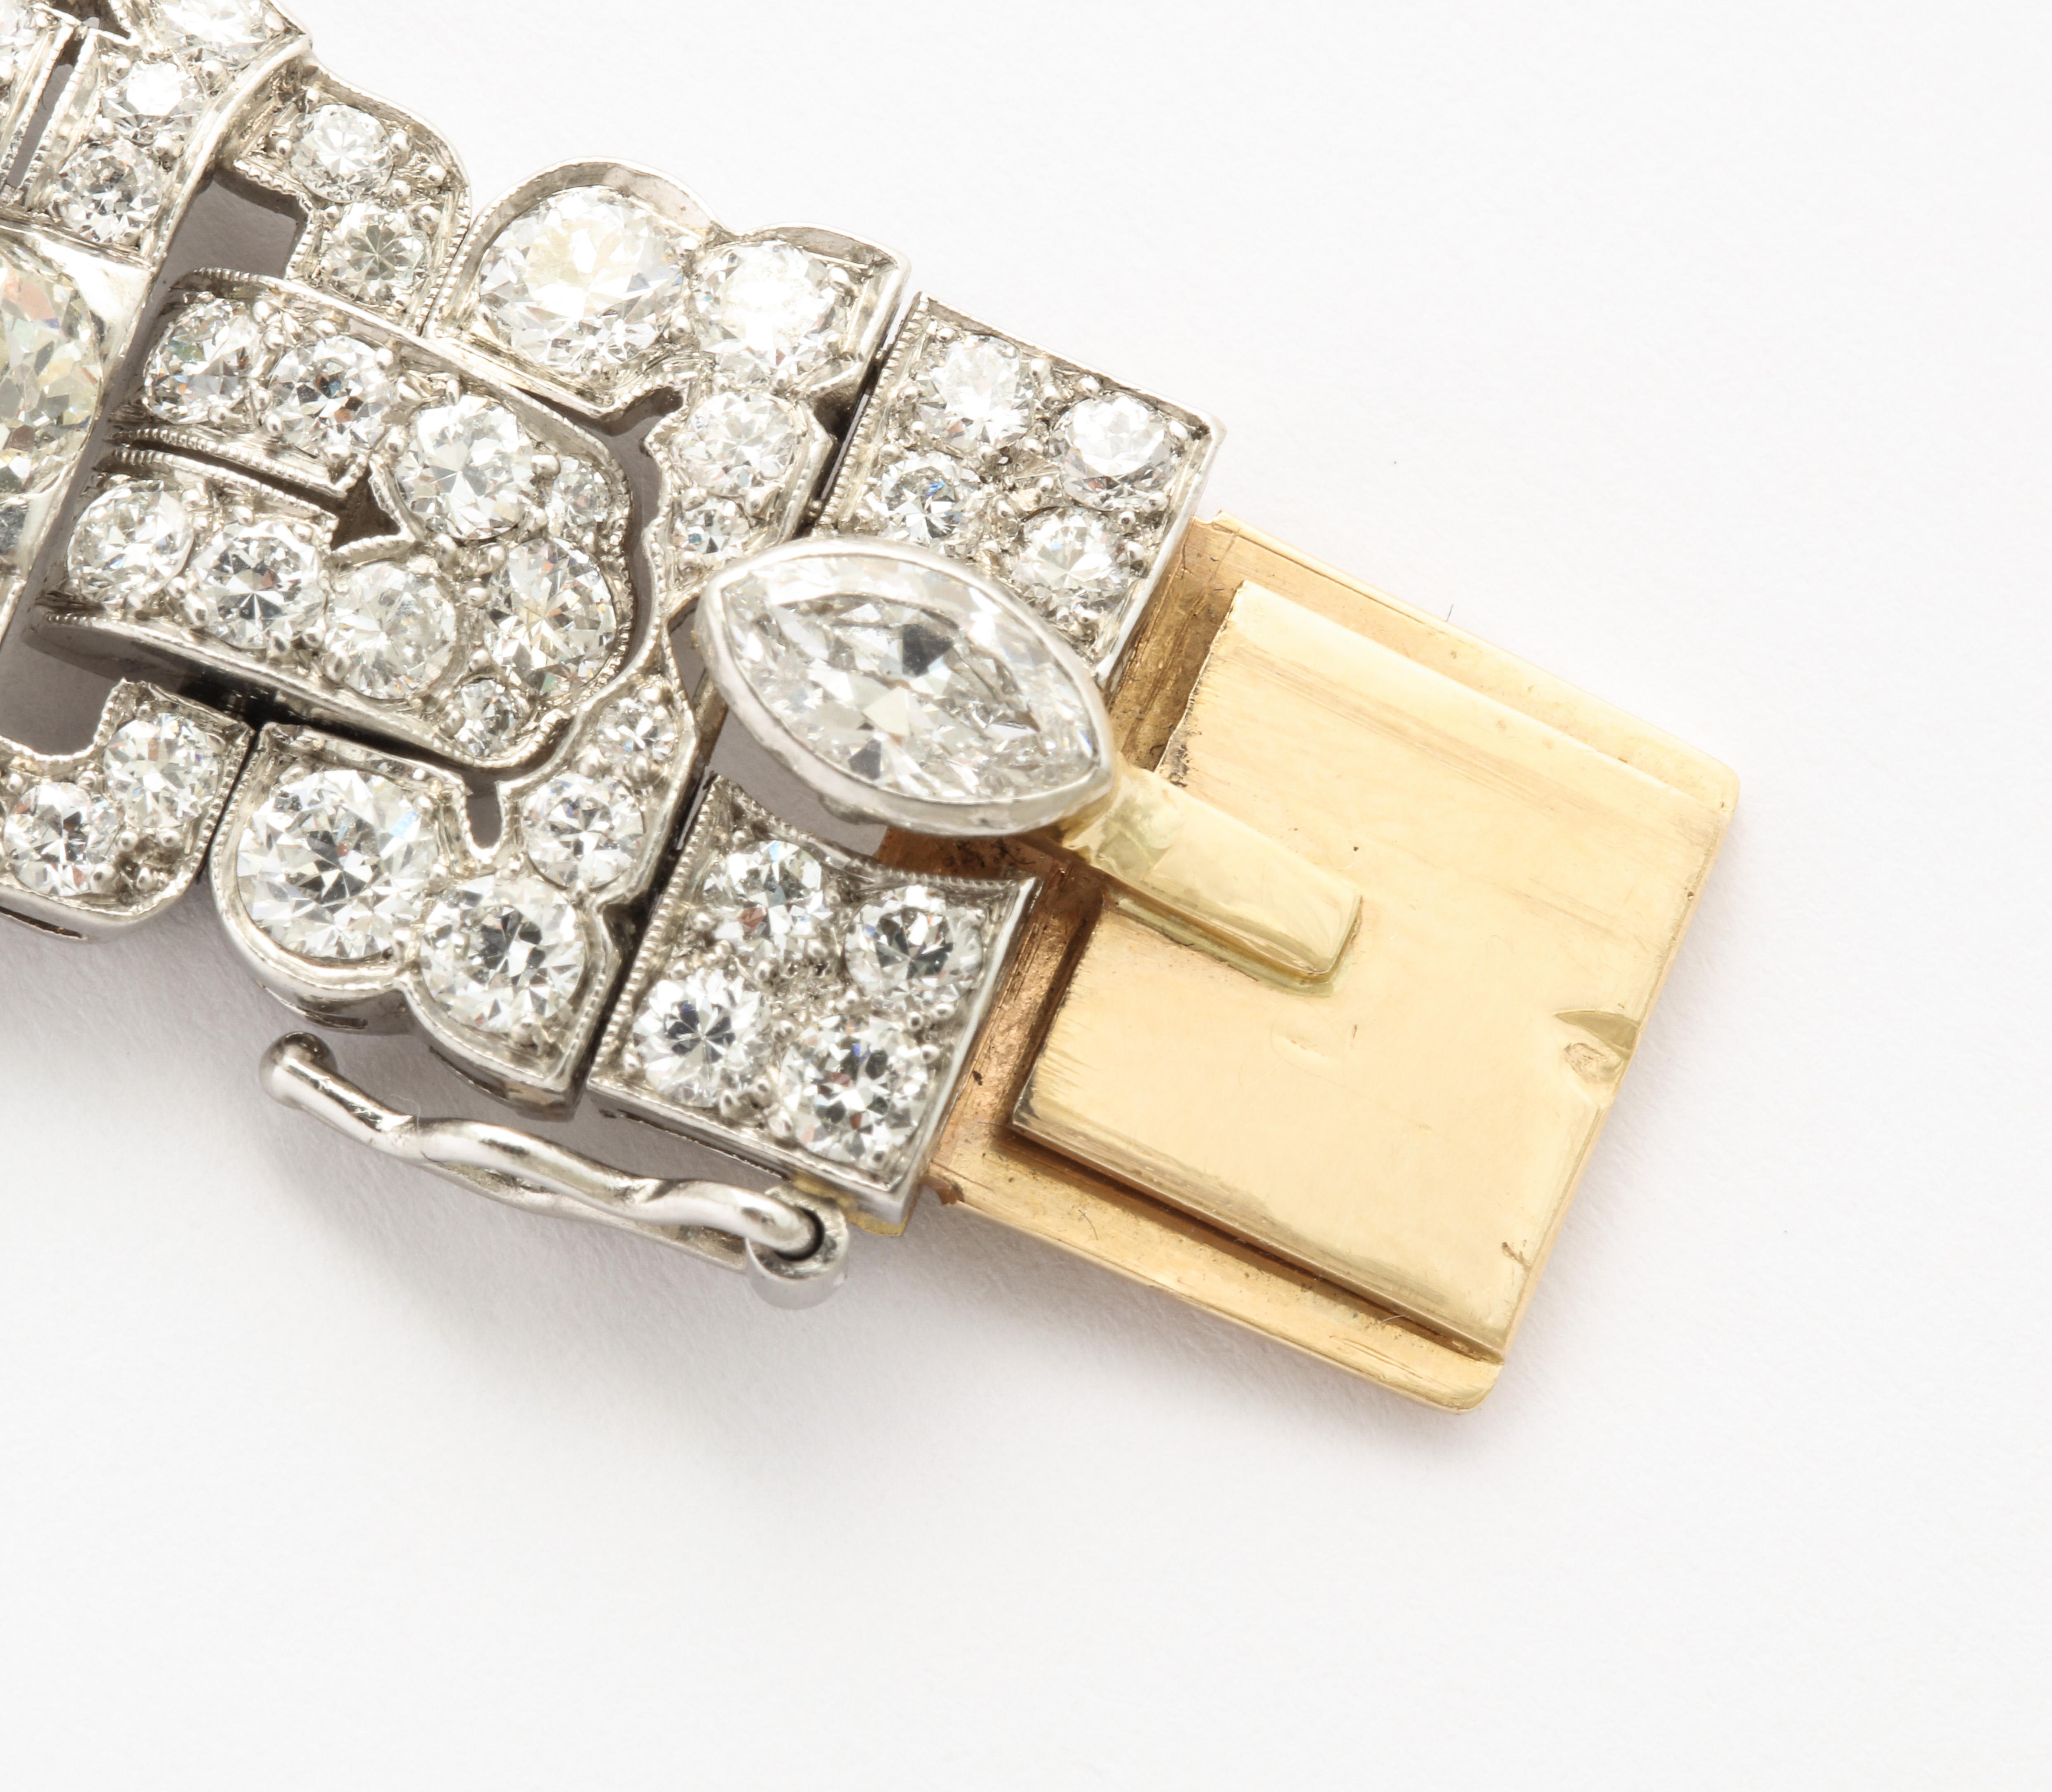 Platinum Art Deco Diamond Bracelet by Tiffany & Co. In Excellent Condition For Sale In New York, NY